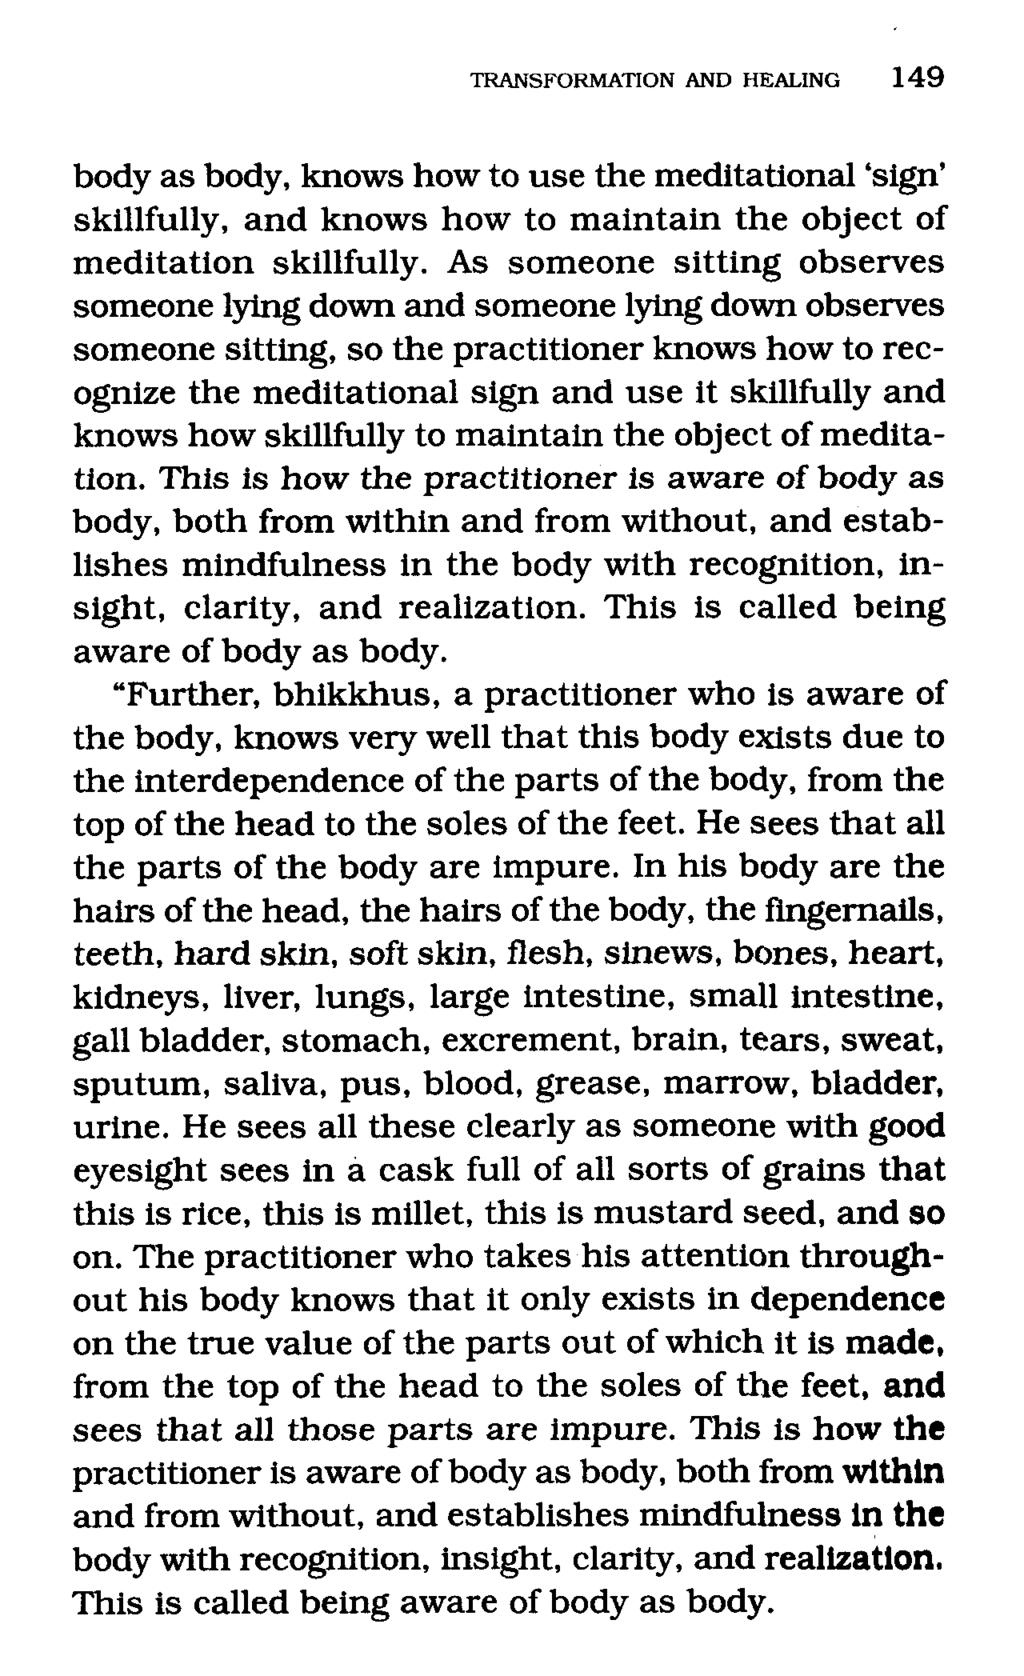 body as body, knows how to use the meditational 'sign' skillfully, and knows how to maintain the object of meditation skillfully.